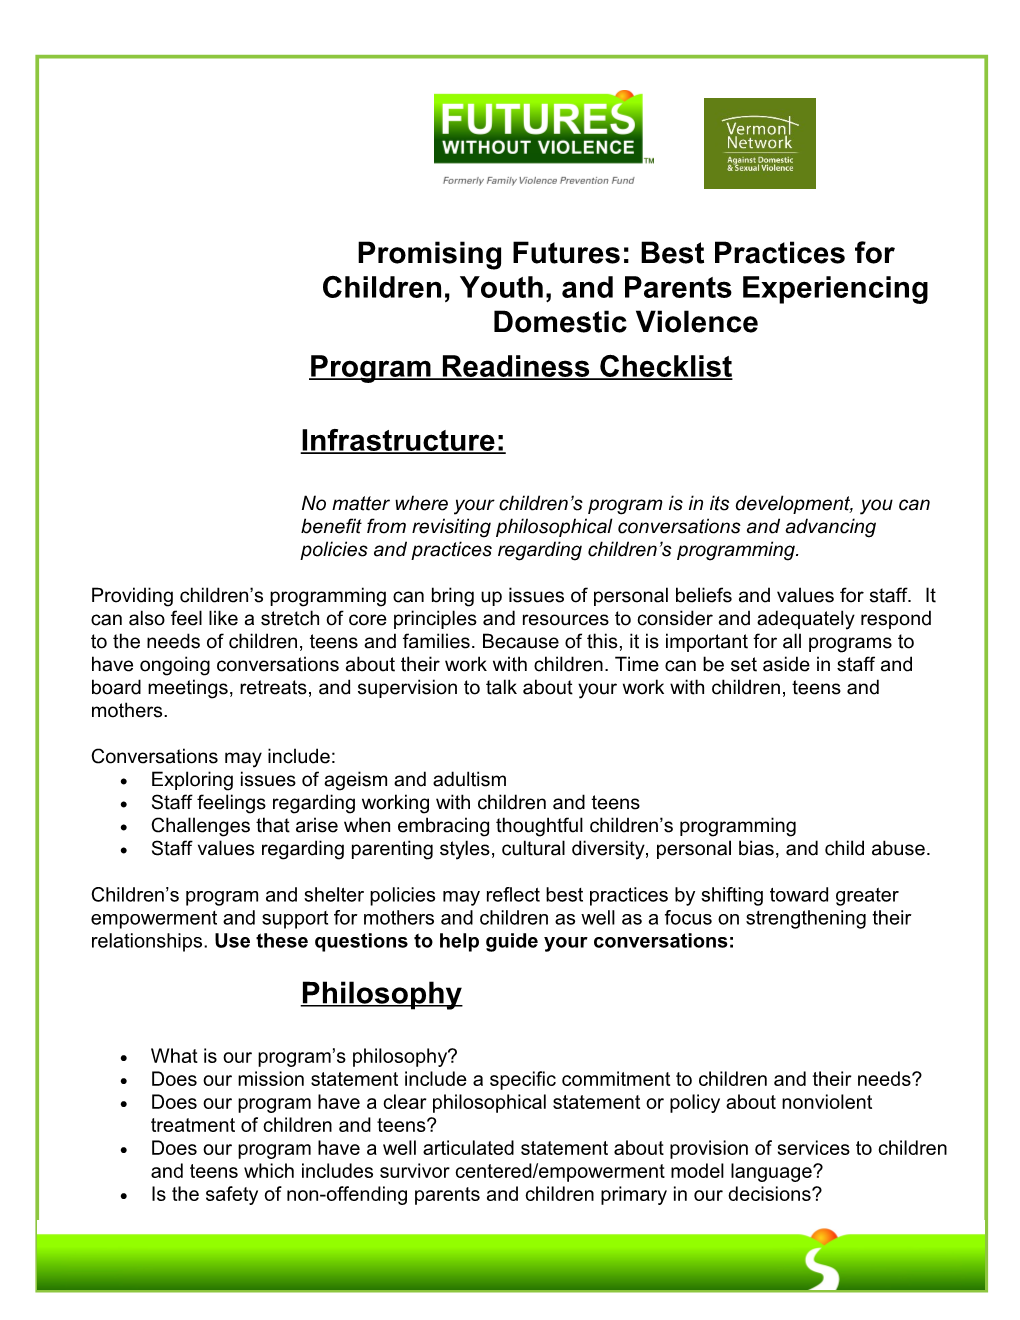 Promising Futures: Best Practices for Children, Youth, and Parents Experiencing Domestic